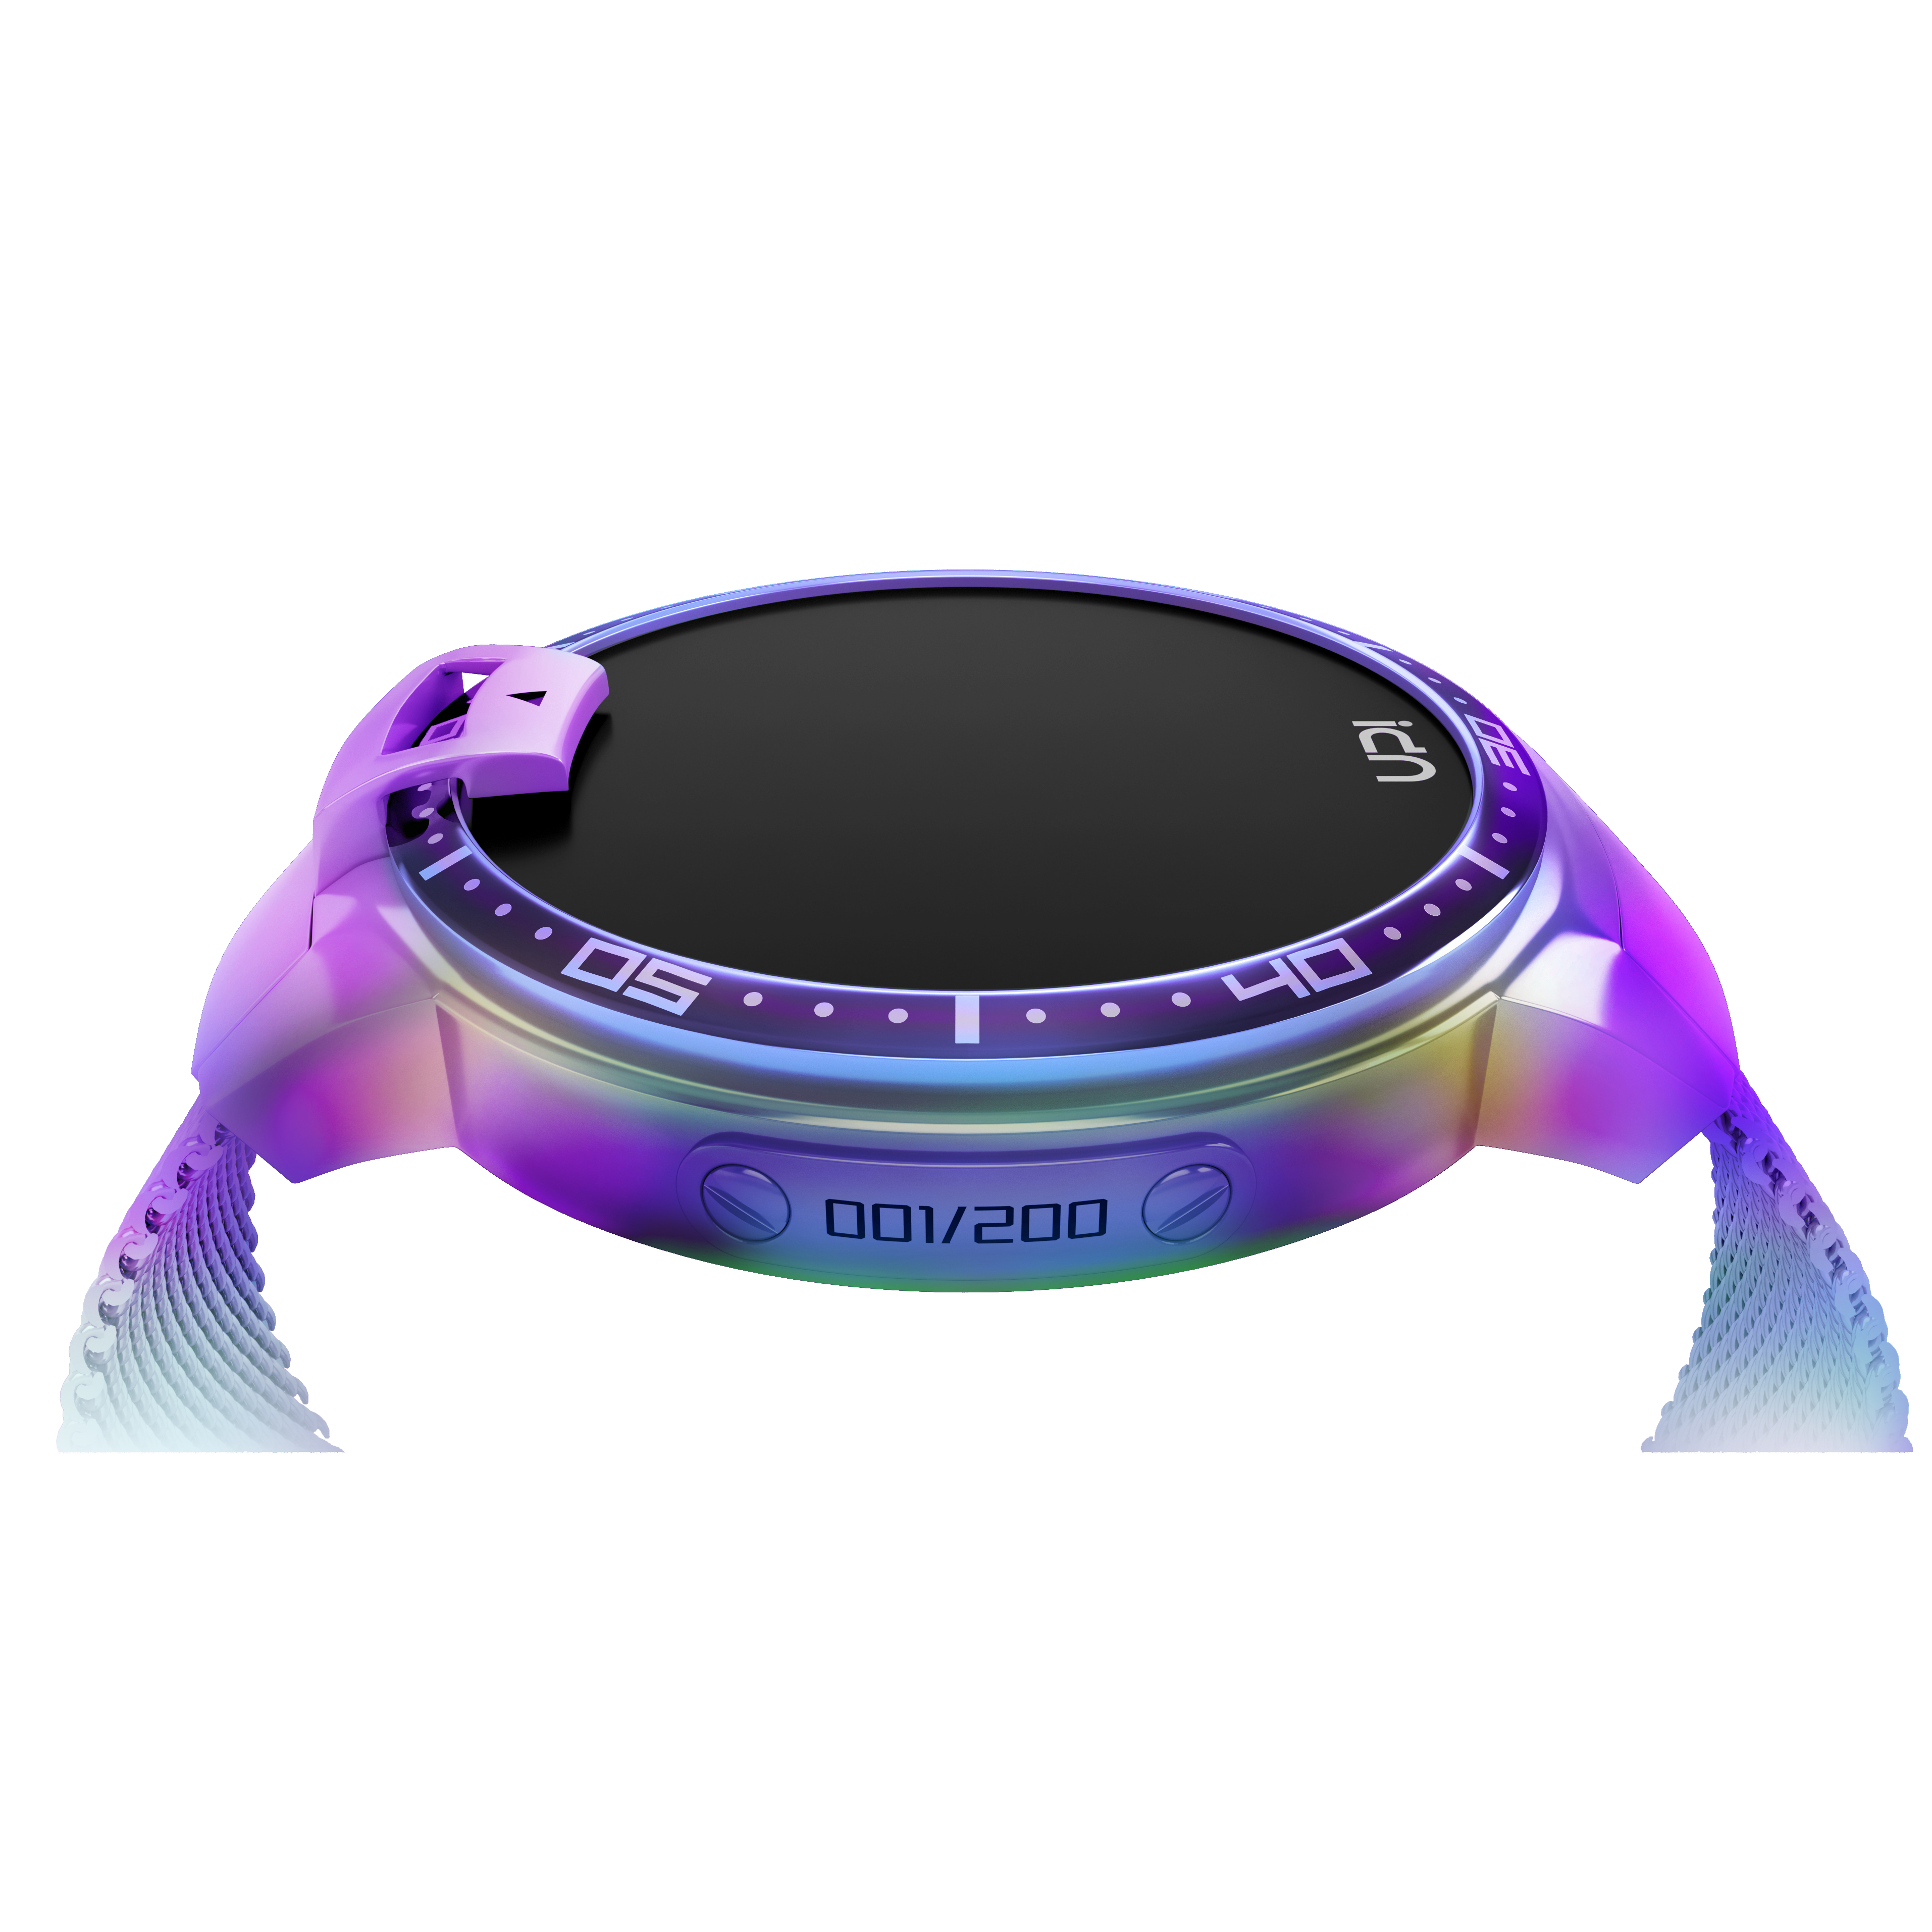 UPWATCH ULTIMATE COLORFUL LIMITED EDITION